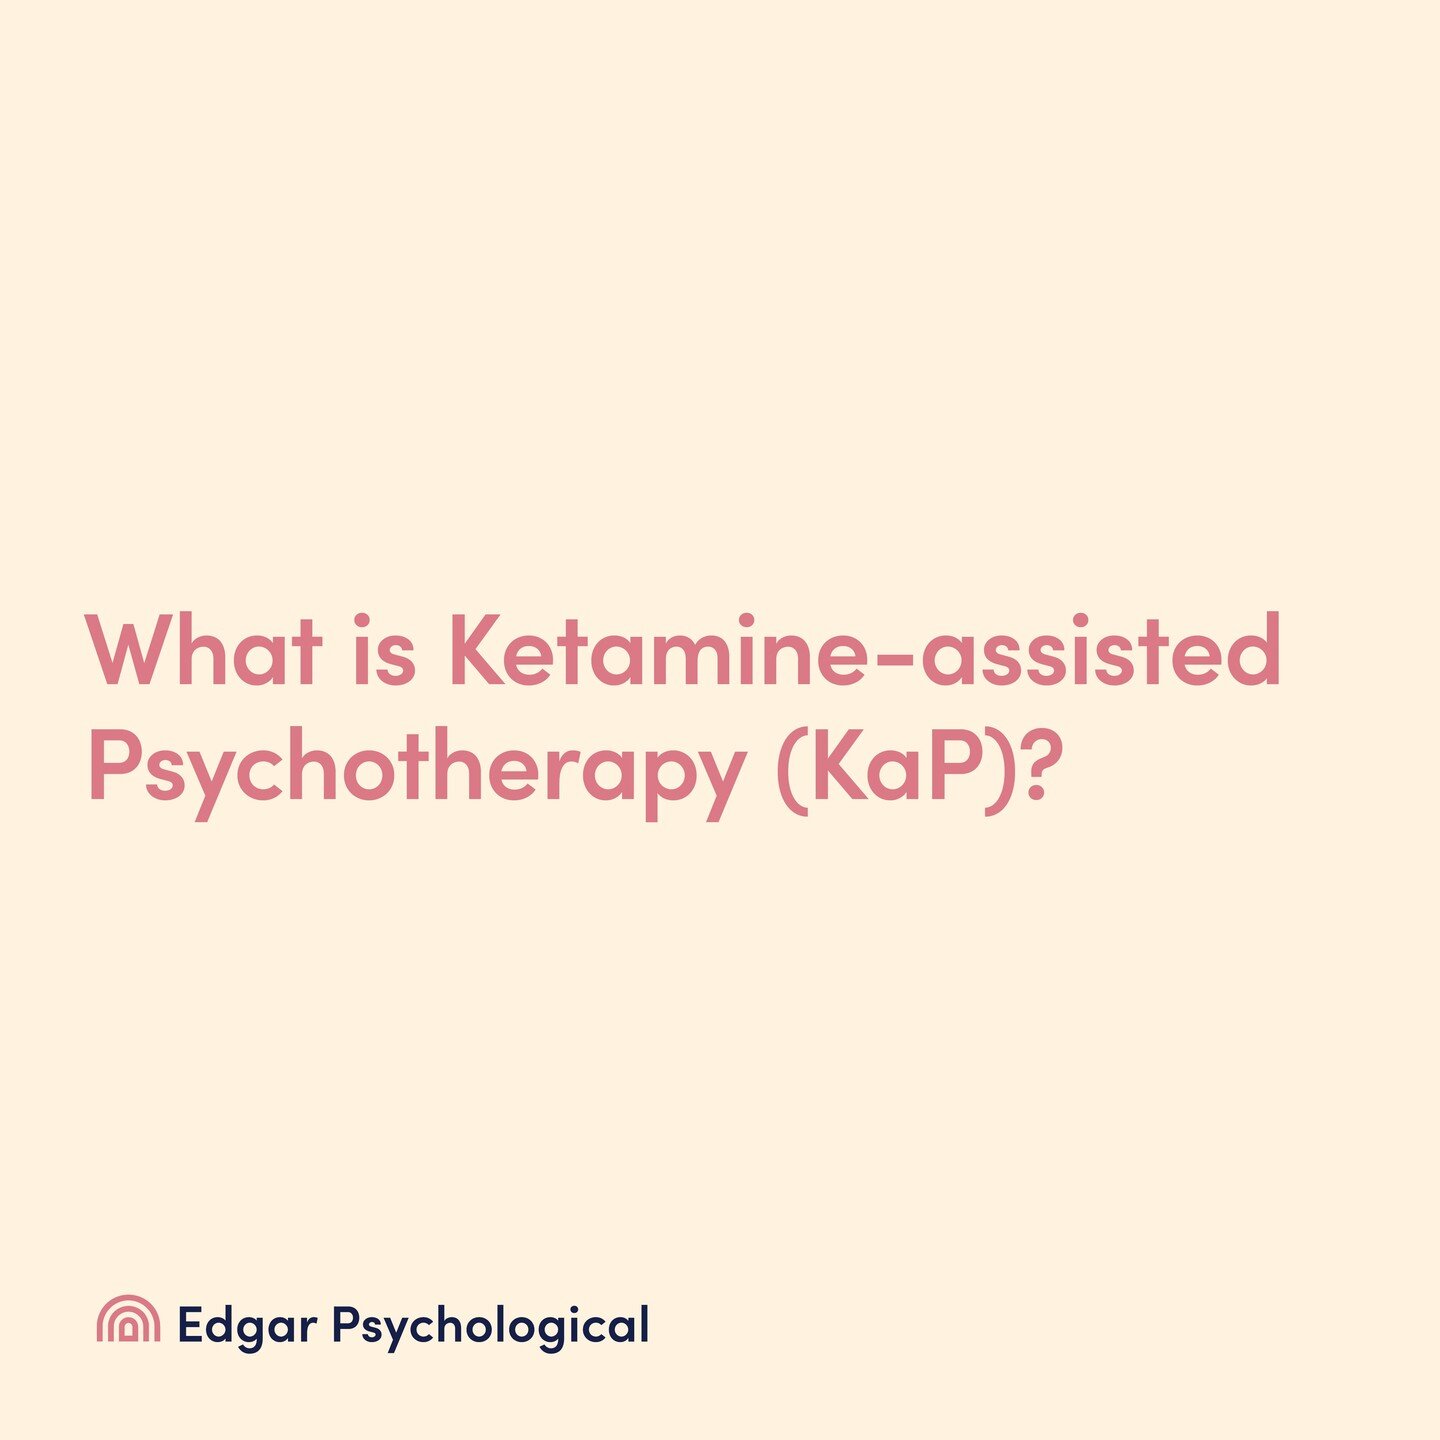 We have exciting new updates about our Group Ketamine-assisted Psychotherapy (KaP) Program, including an upcoming group starting April 2024. Our 10-week Group Ketamine-assisted Psychotherapy (KaP) Program aligns with current best practices in psyched